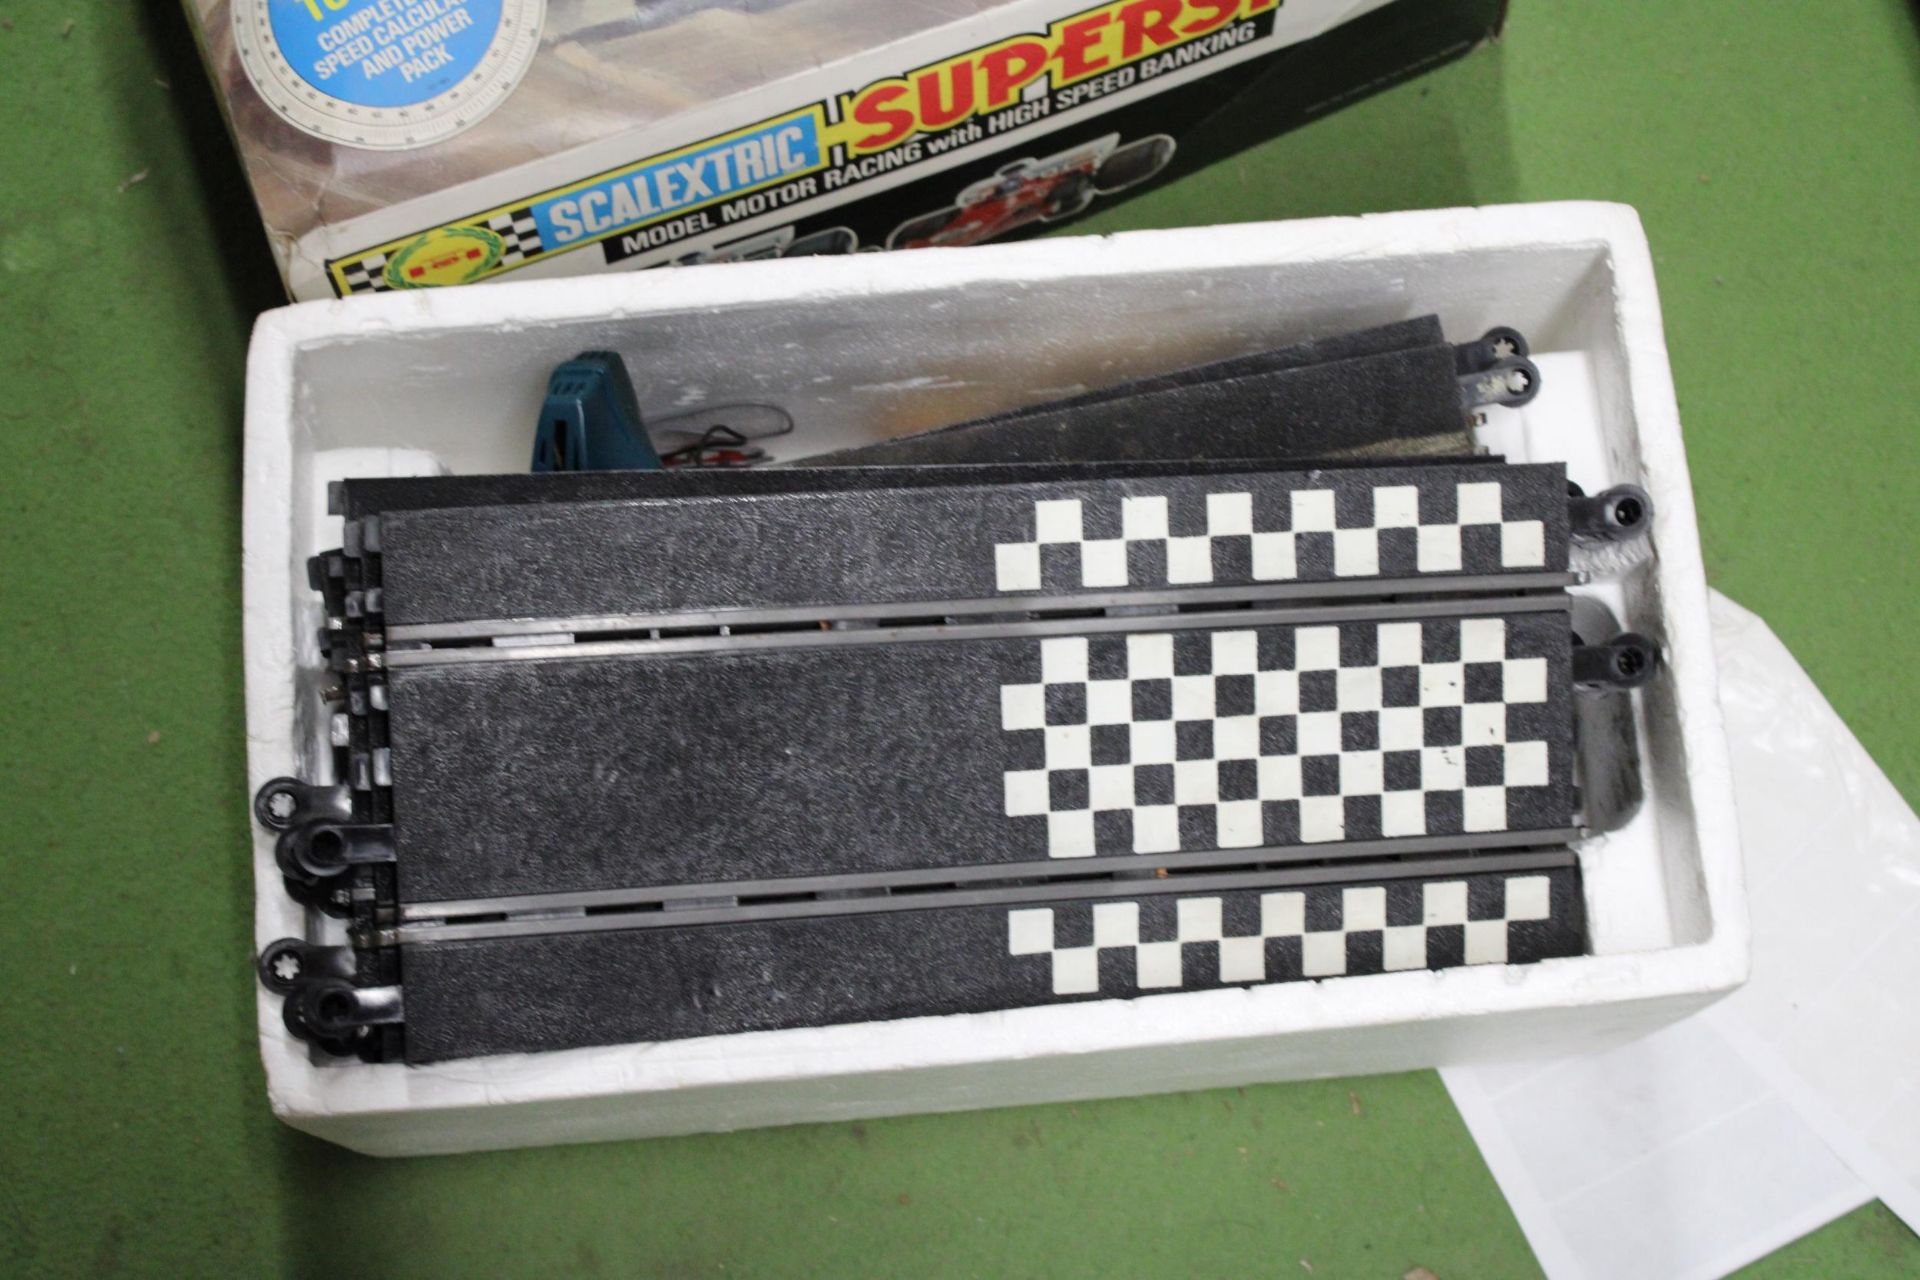 A BOXED SCALEXTRIC SUPERSPEED MODEL MOTOR RACING SET - Image 2 of 5